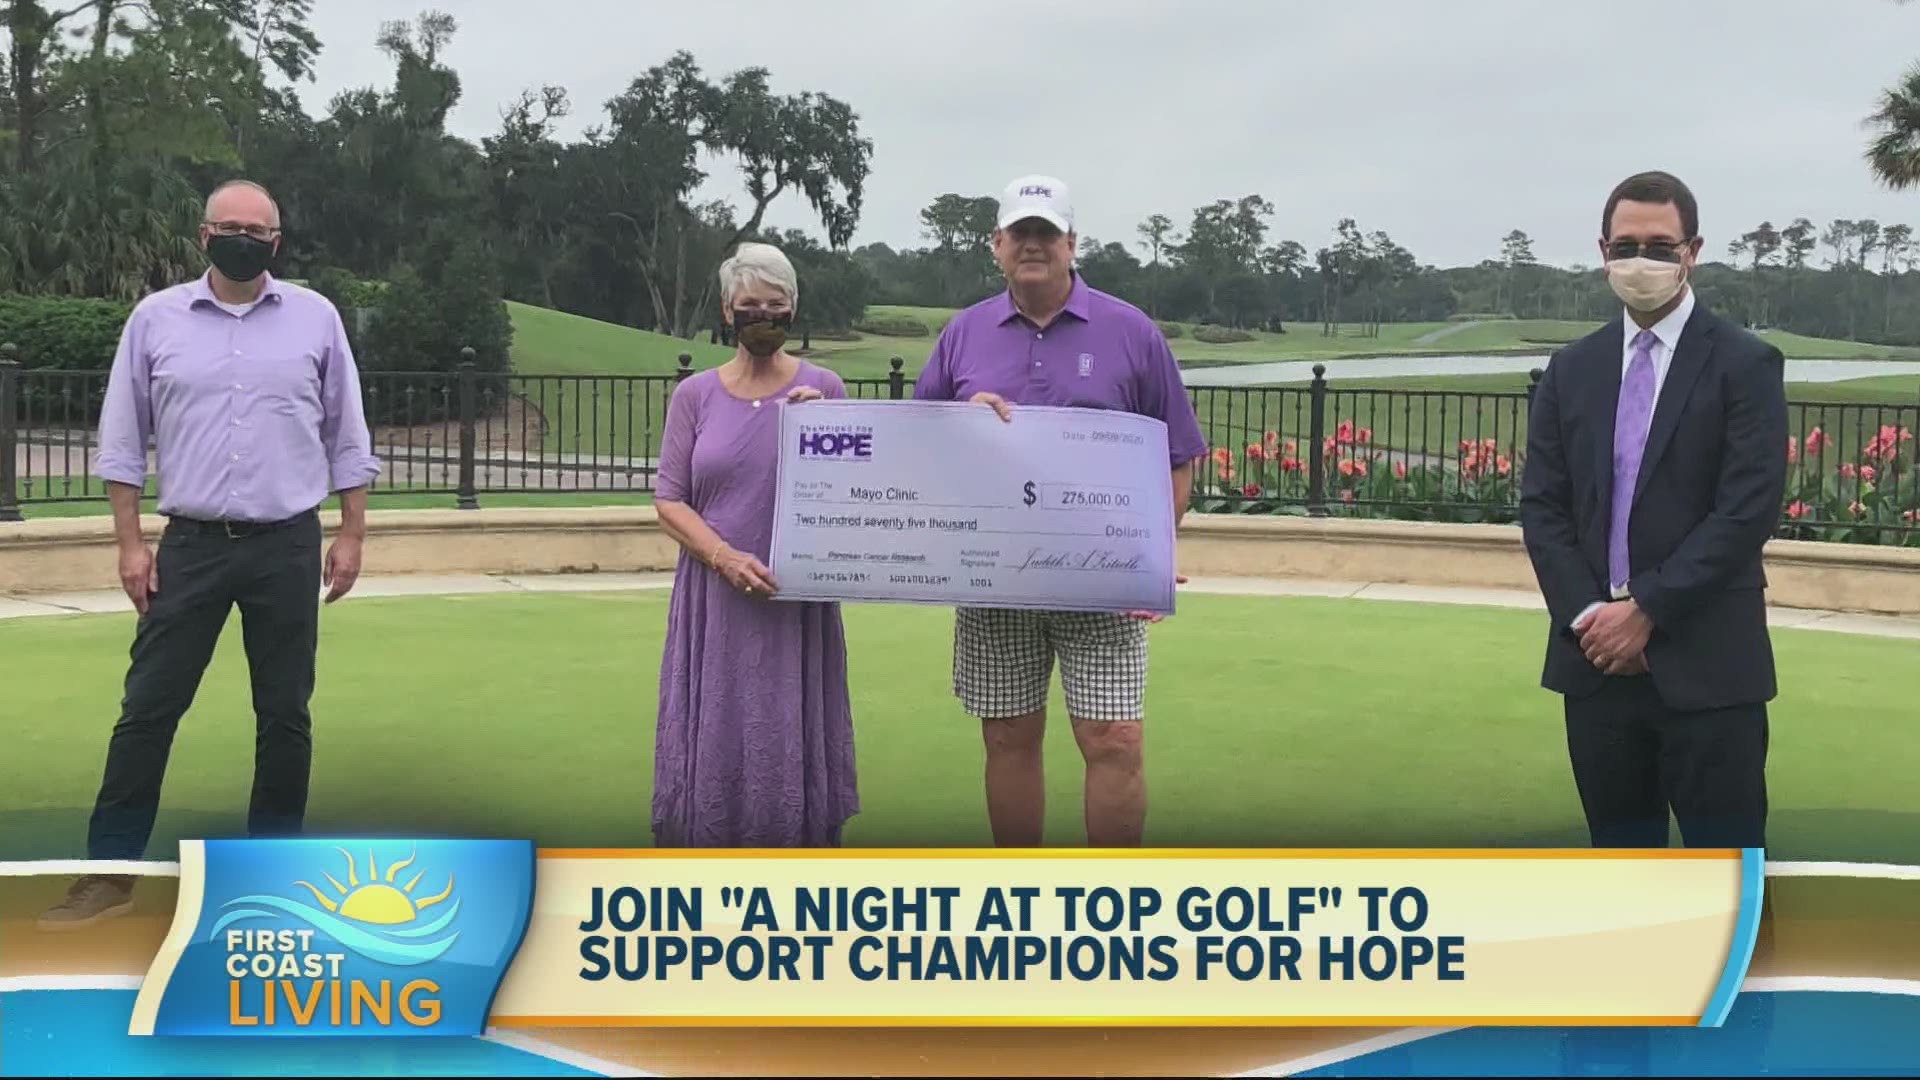 Support Champions for Hope with a night of Top Golf.